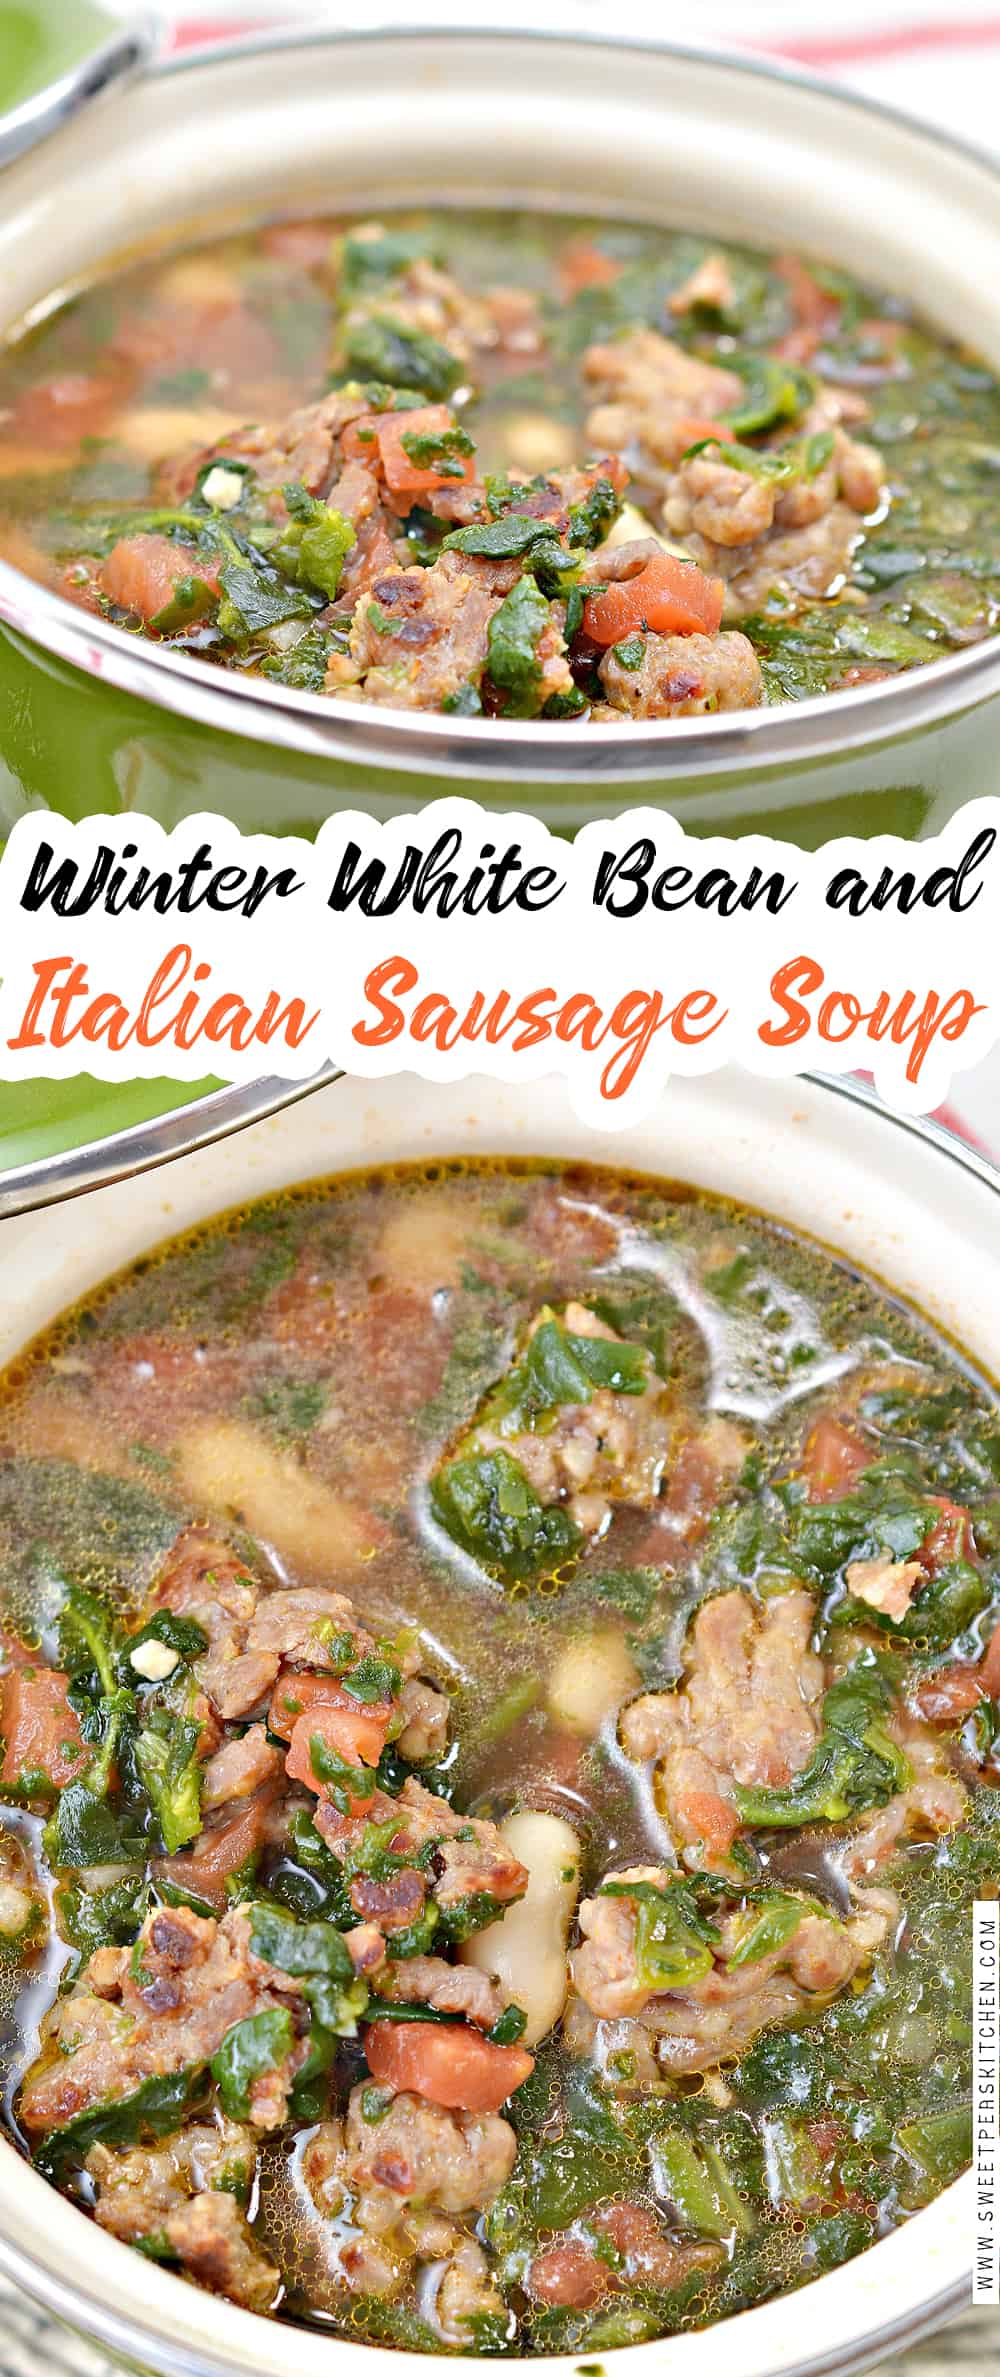 Winter White Bean and Italian Sausage Soup on pinterest